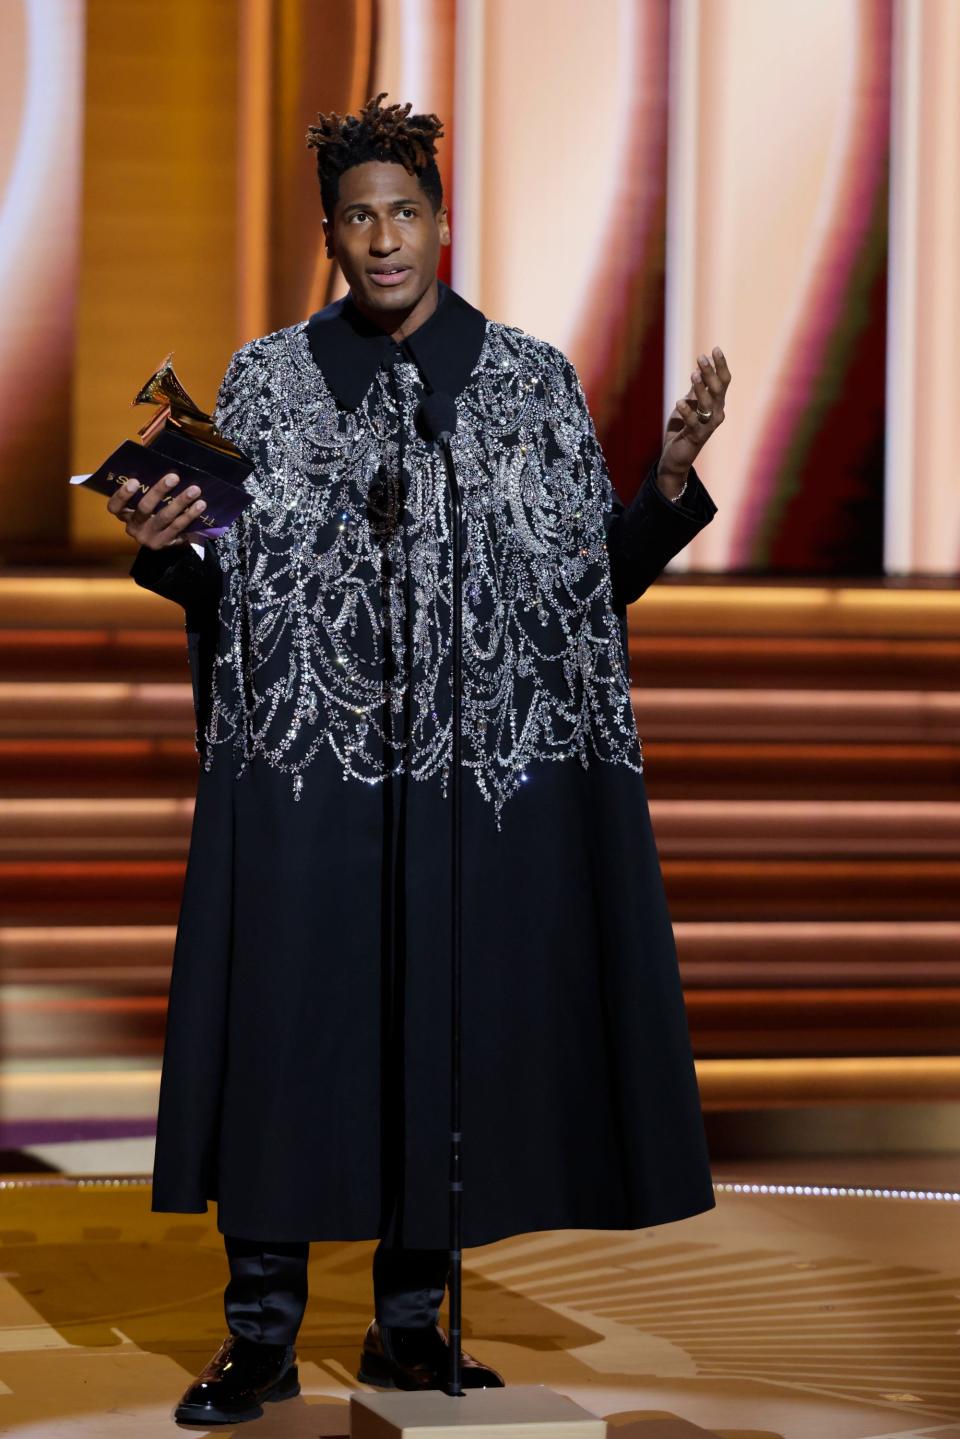 Jon in a black ankle-length cape coat with silver sparkling embellishments from the collar down to mid-coat.